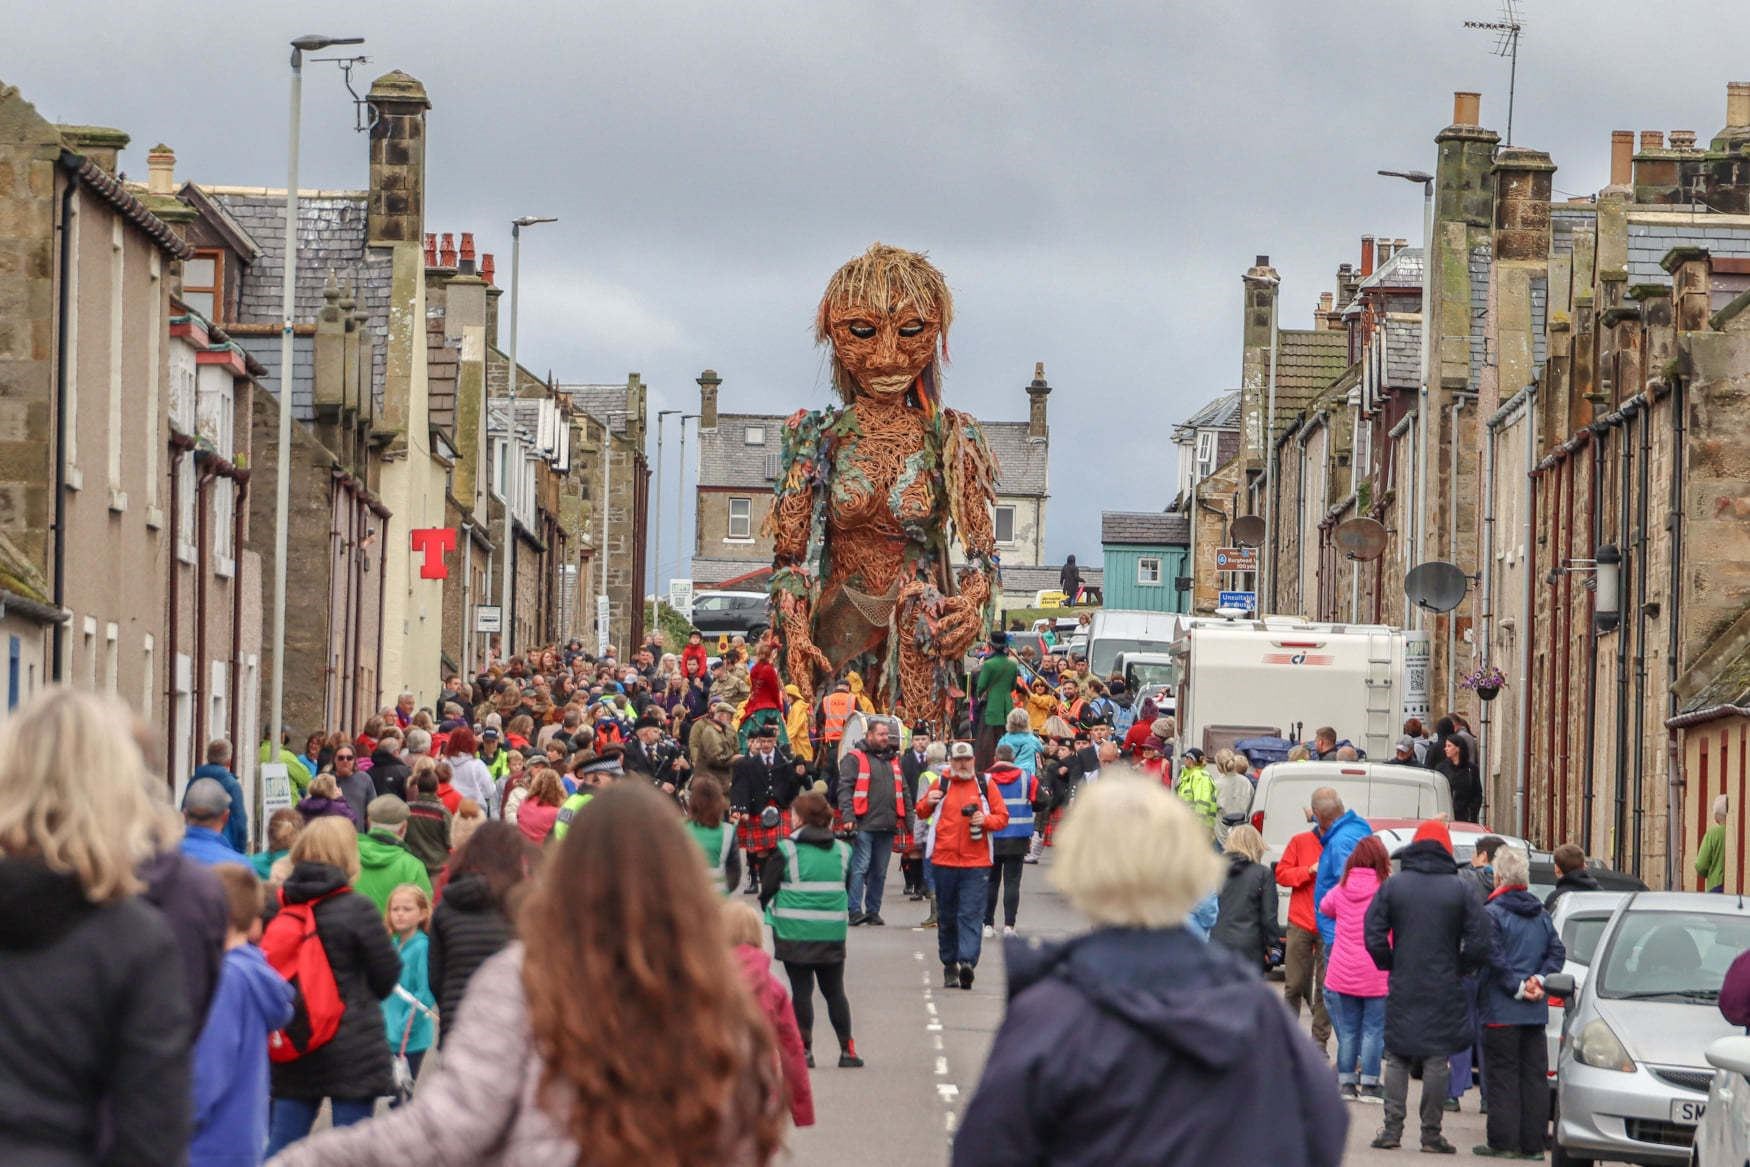 Giant puppet STORM making an appearance in Burghead as part of a Findhorn Bay Arts event.